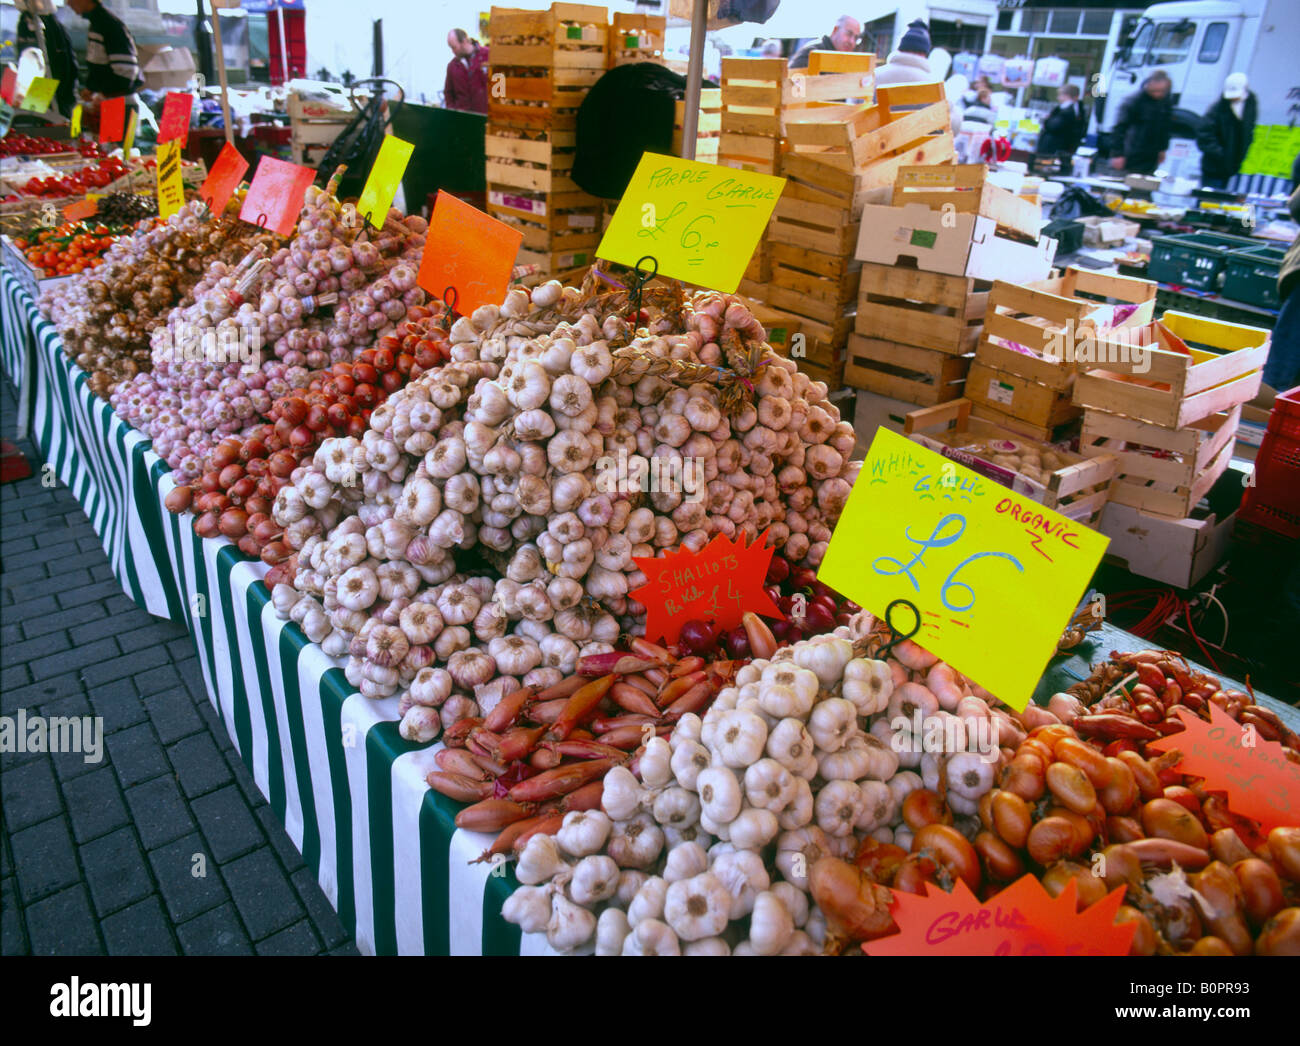 A garlic seller at a continental market held in Sleaford Lincolnshire UK Stock Photo